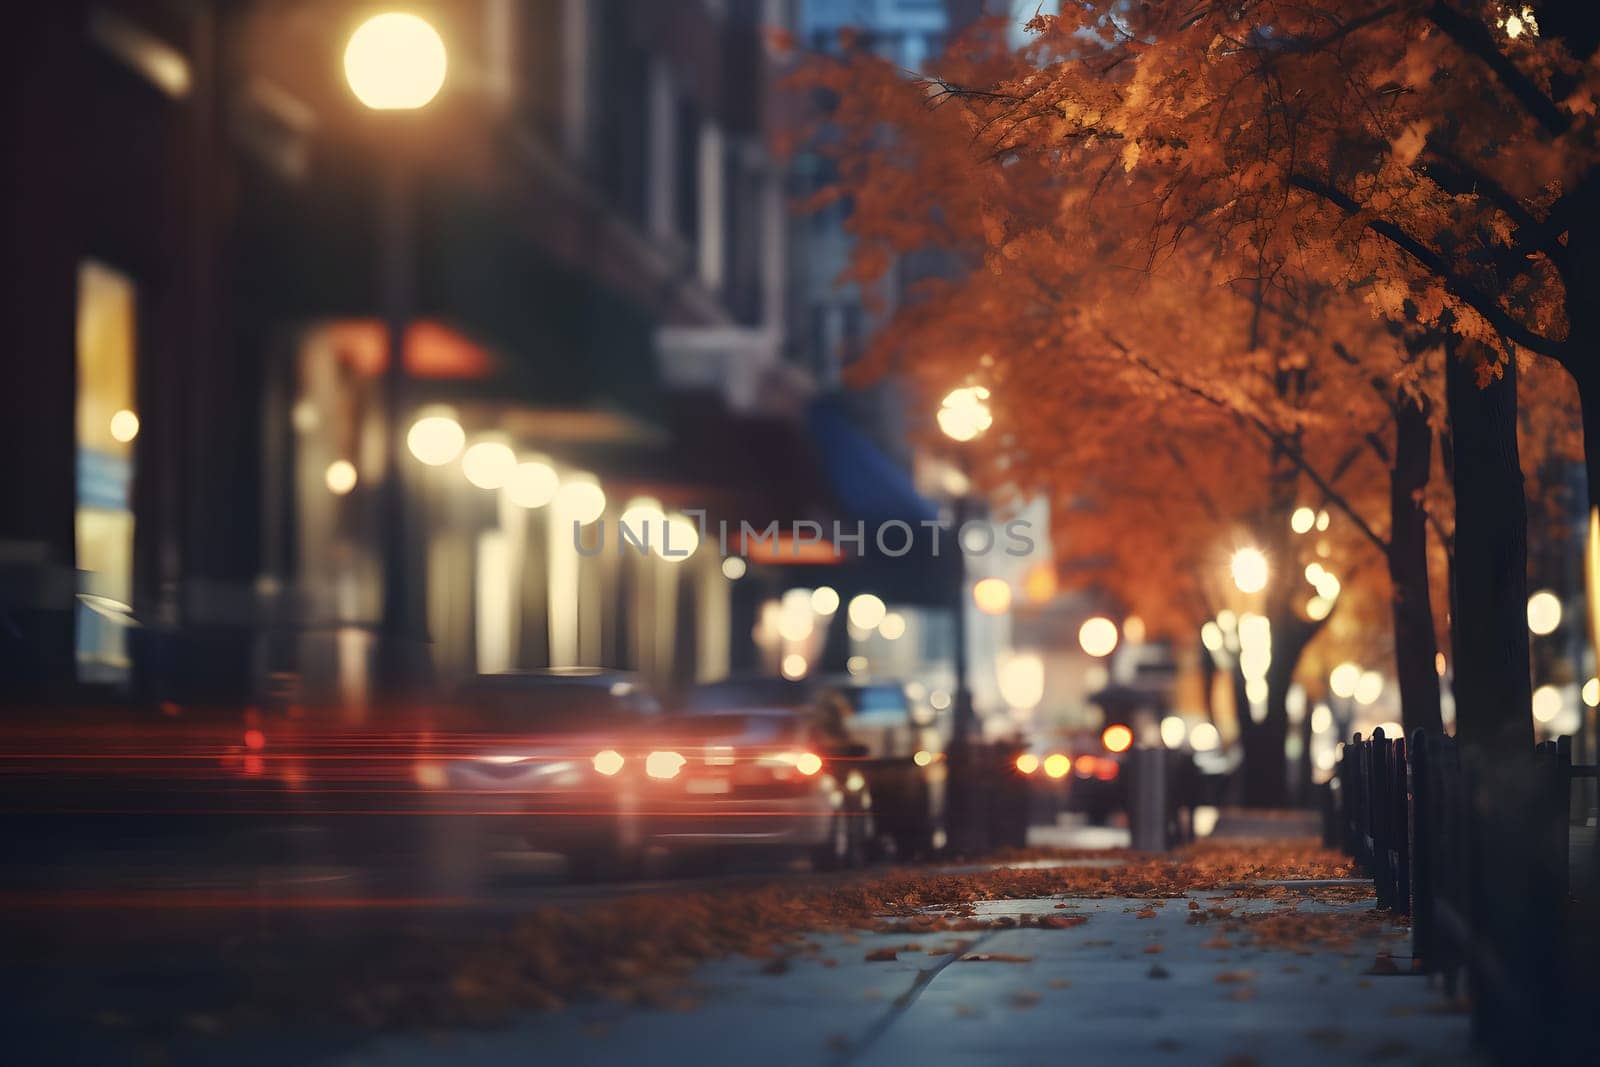 American downtown street view at autumn night. Neural network generated image. Not based on any actual scene.